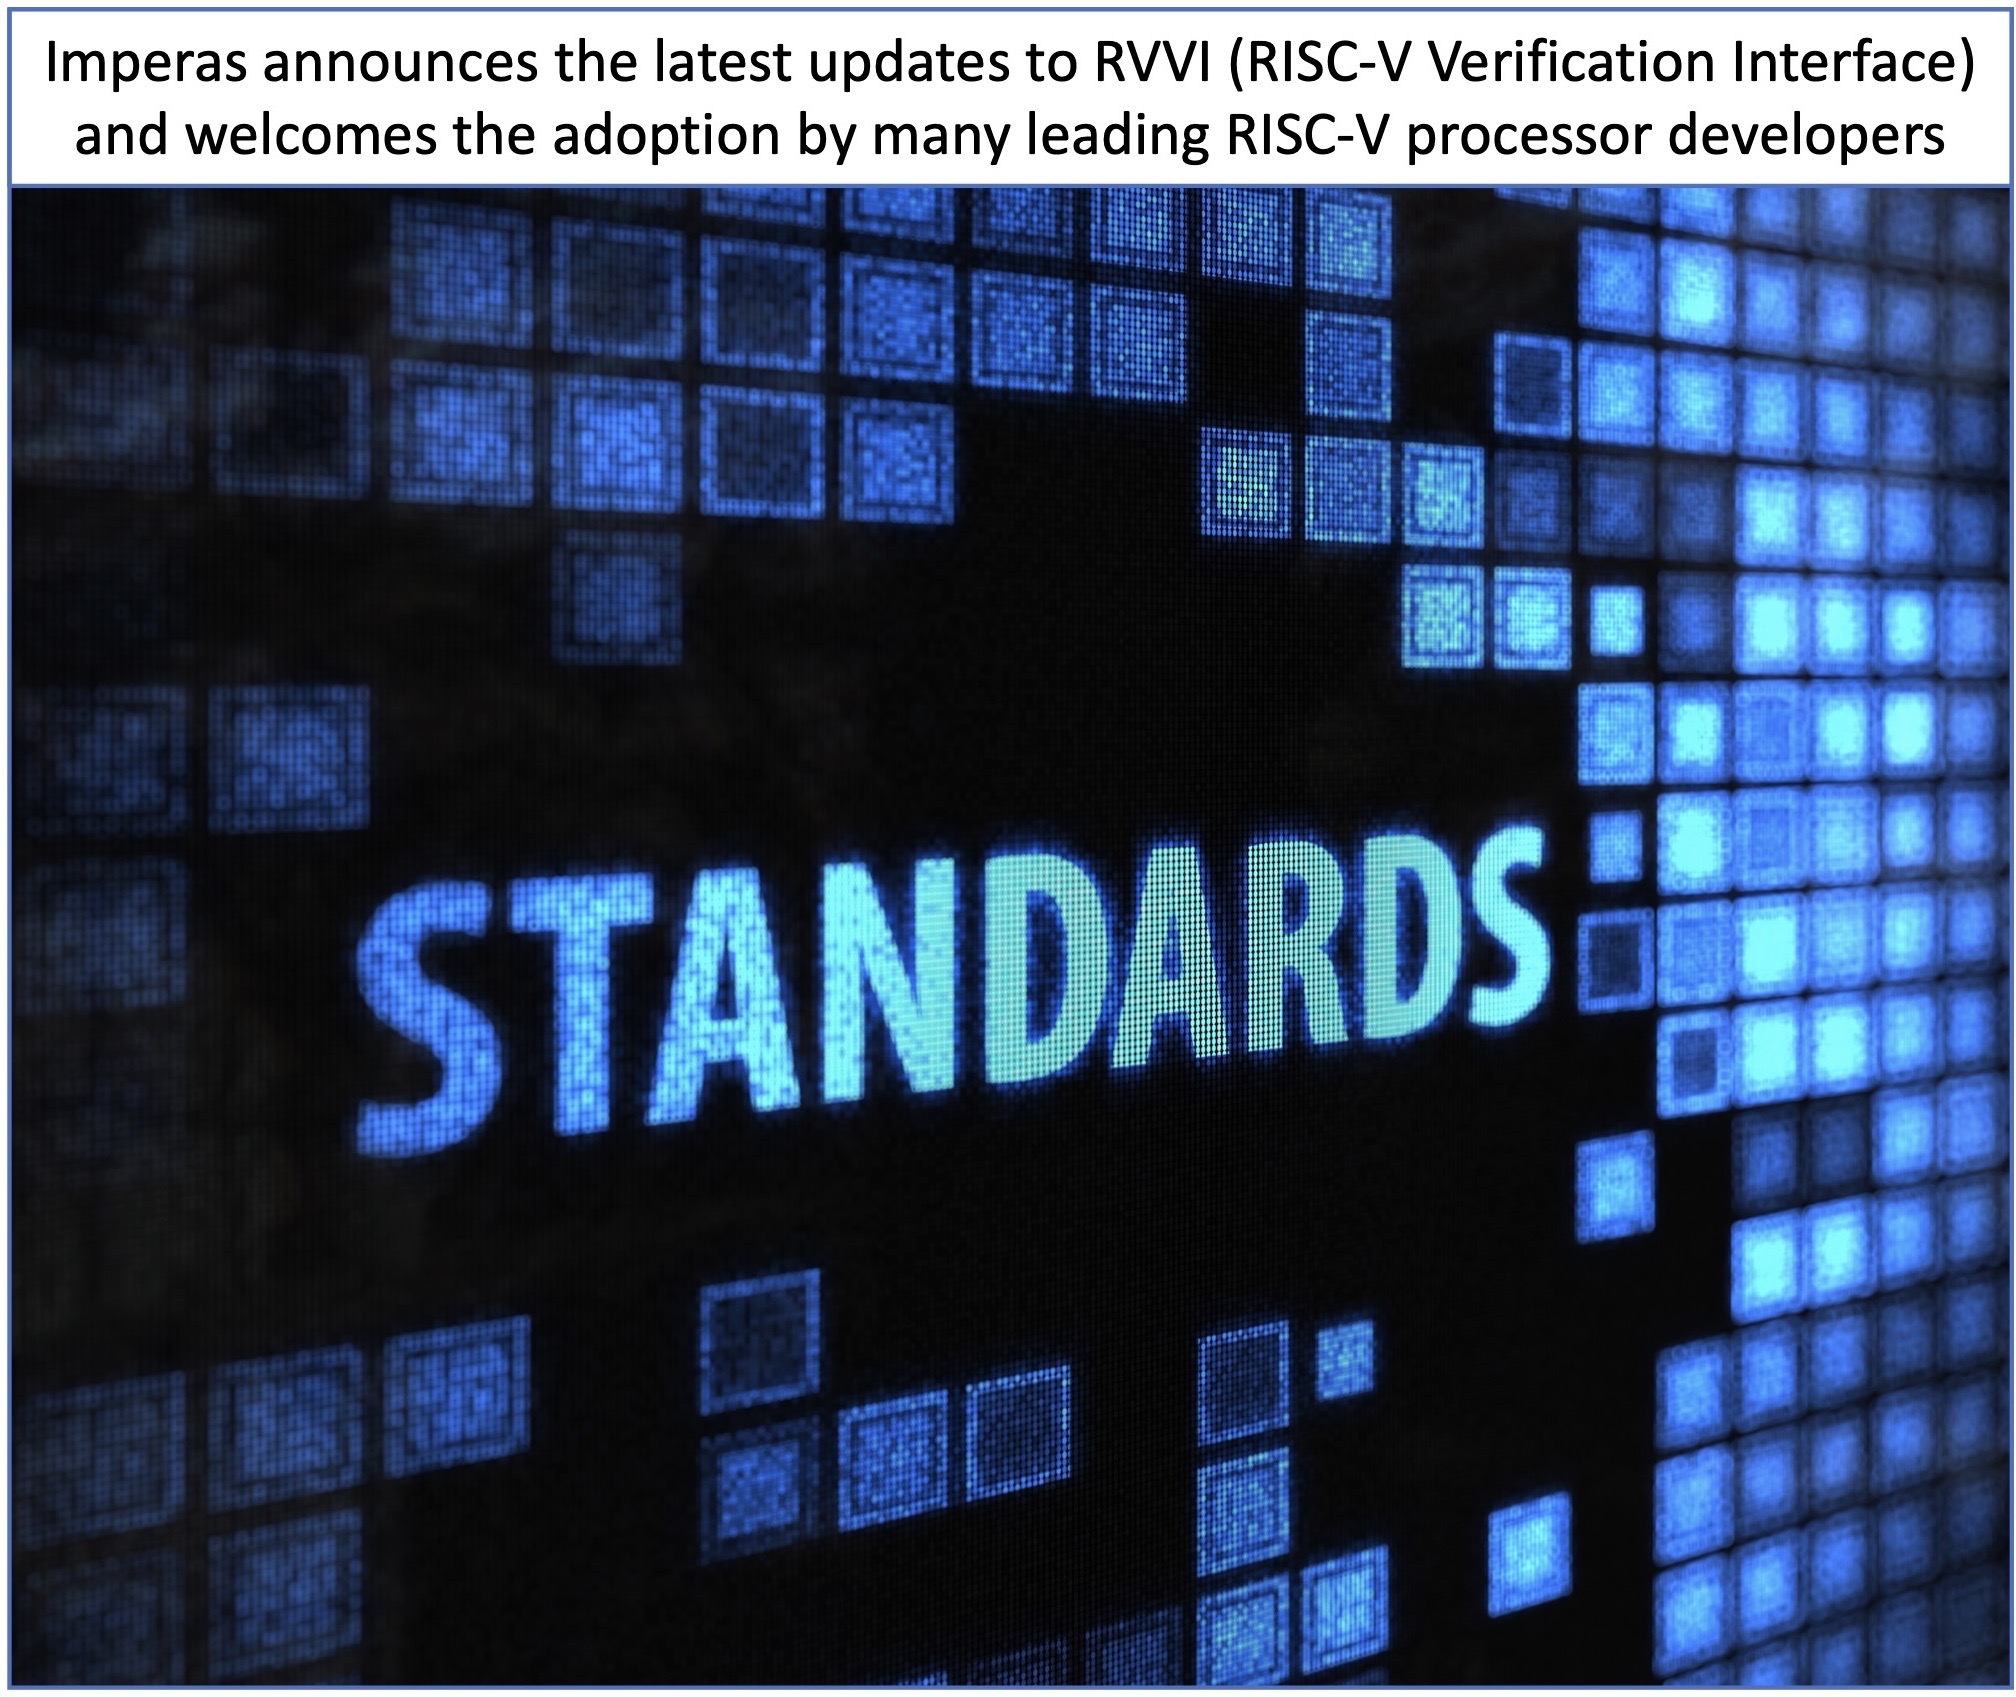 Imperas updates RVVI and welcomes the adoption by leading RISC-V processor developers